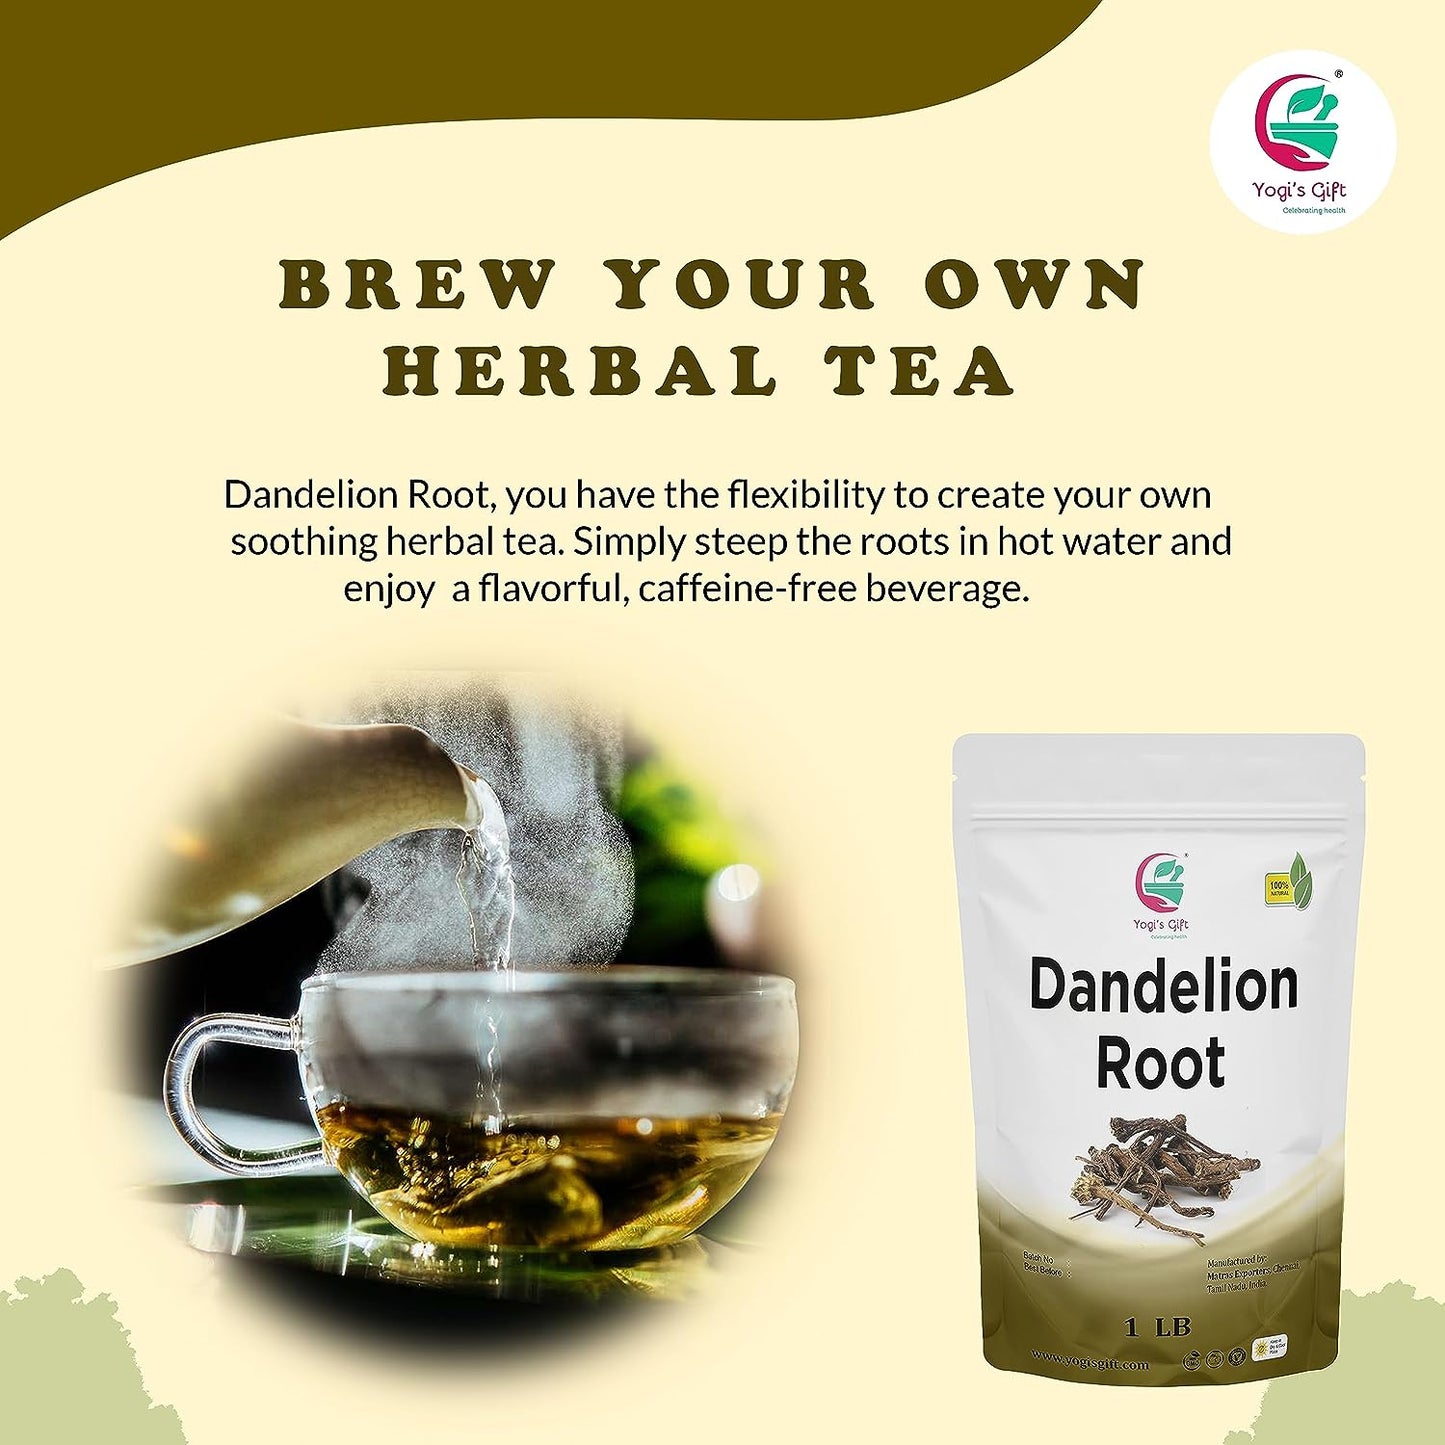 Dandelion Root 1 LB | Raw and Whole Loose root | by Yogi's Gift®